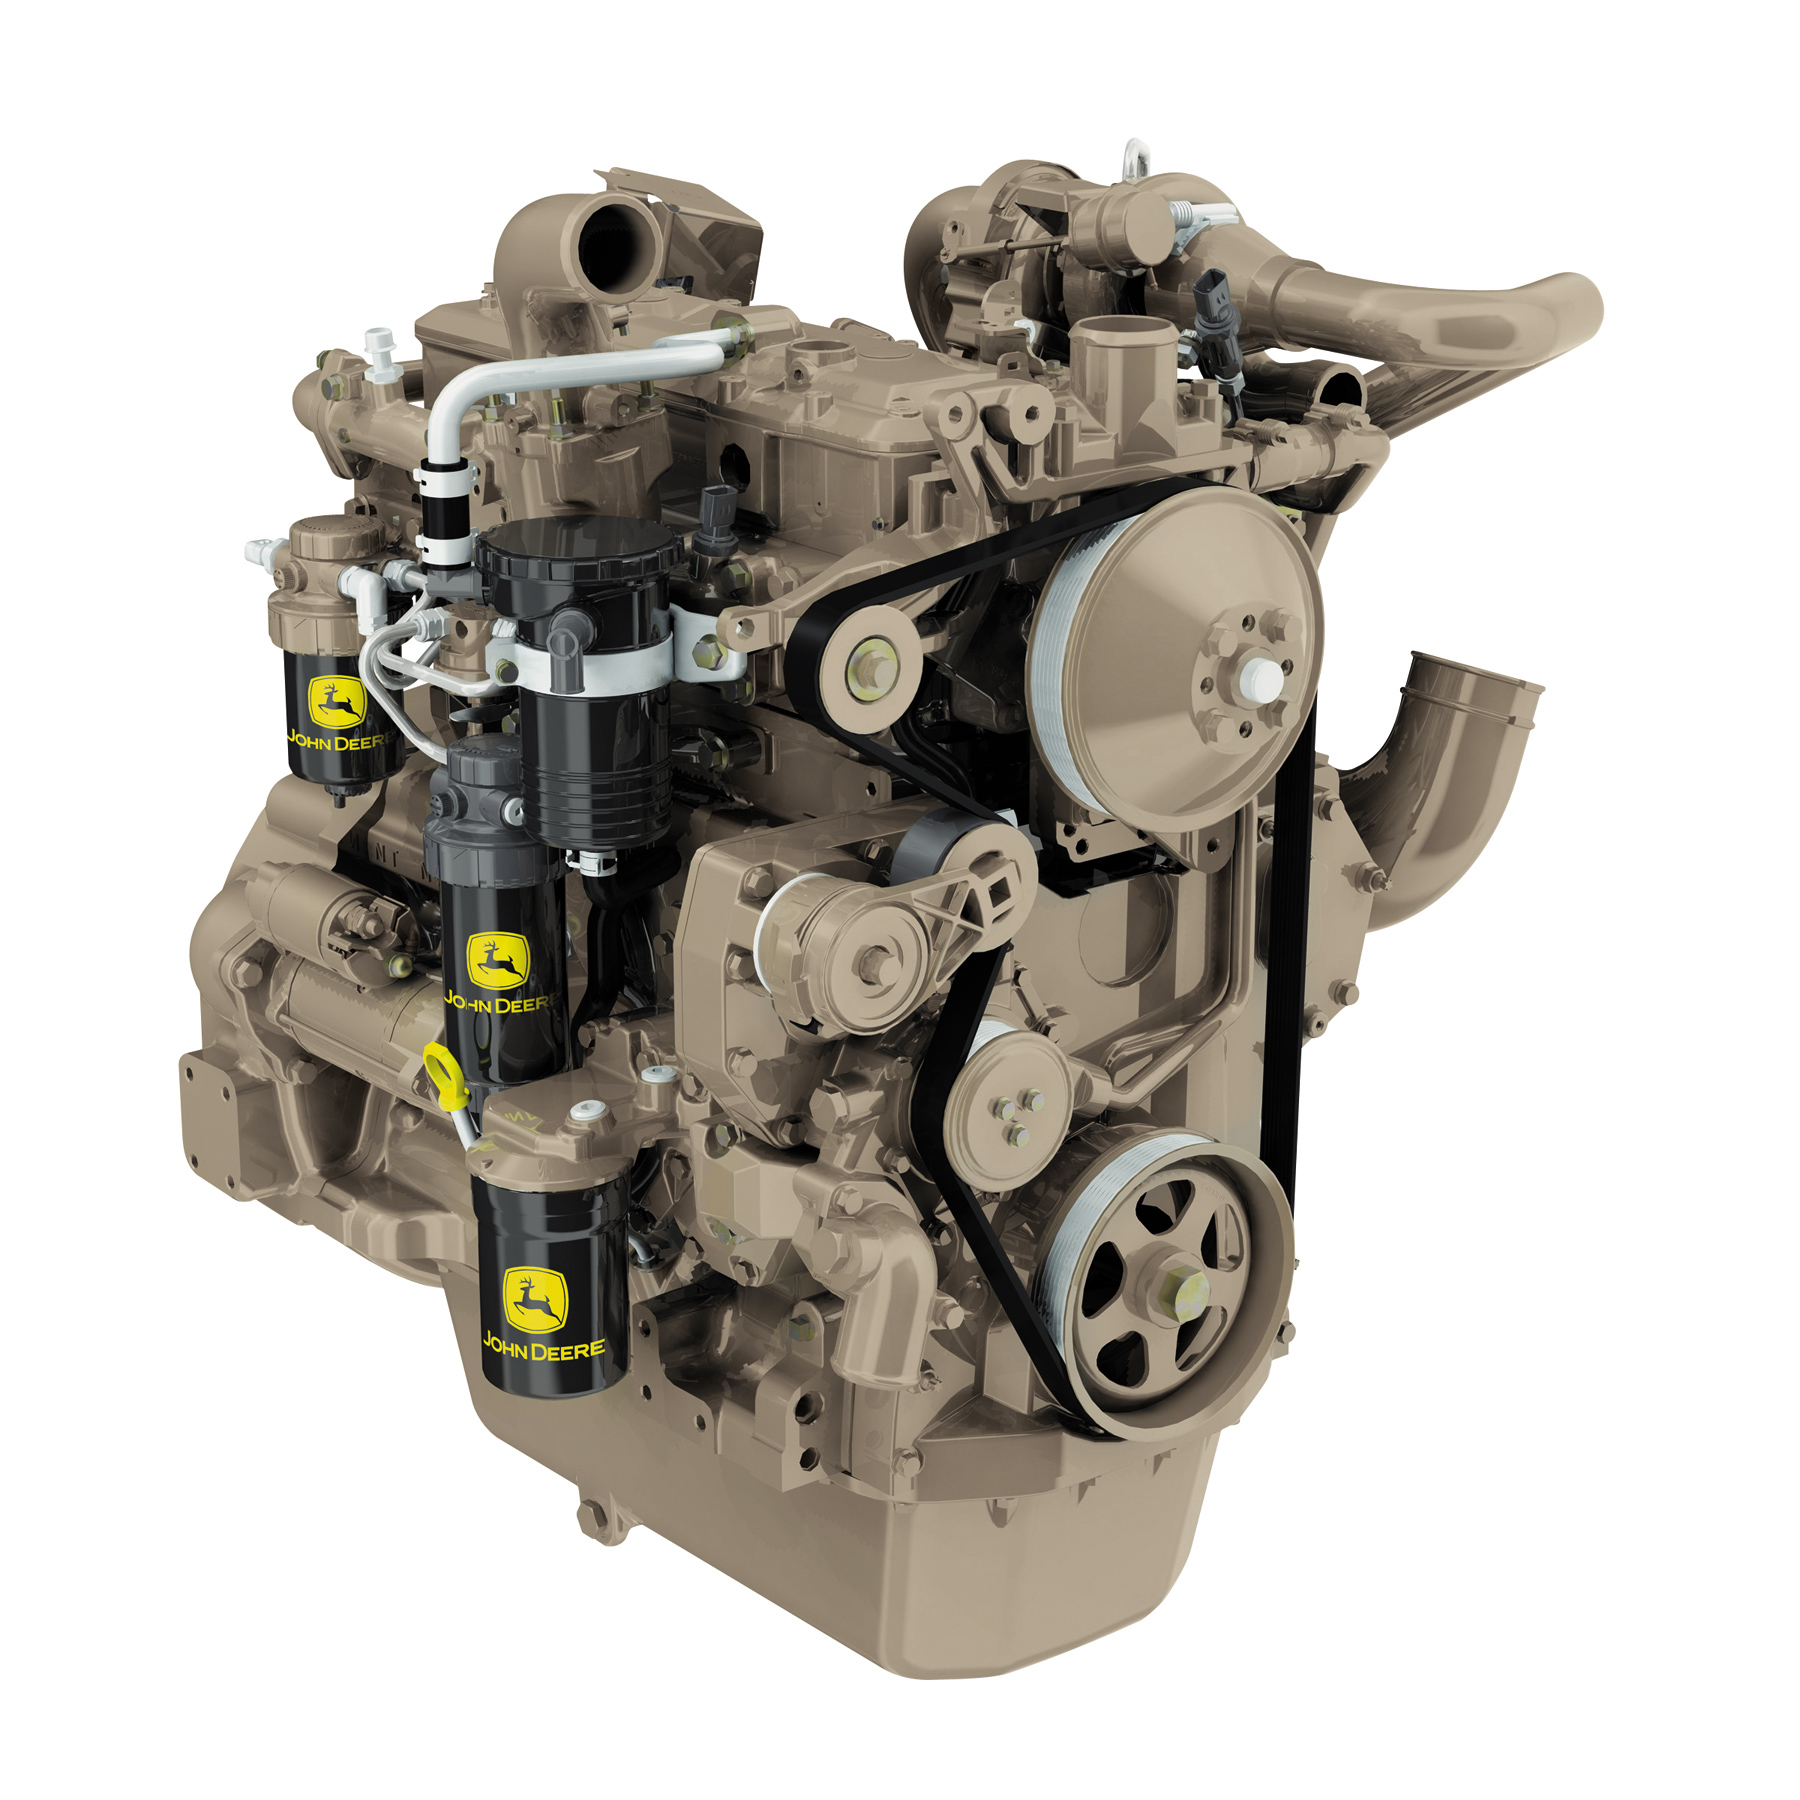 John Deere Power Systems to Offer JDLink with Interim Tier 4/Stage III ...